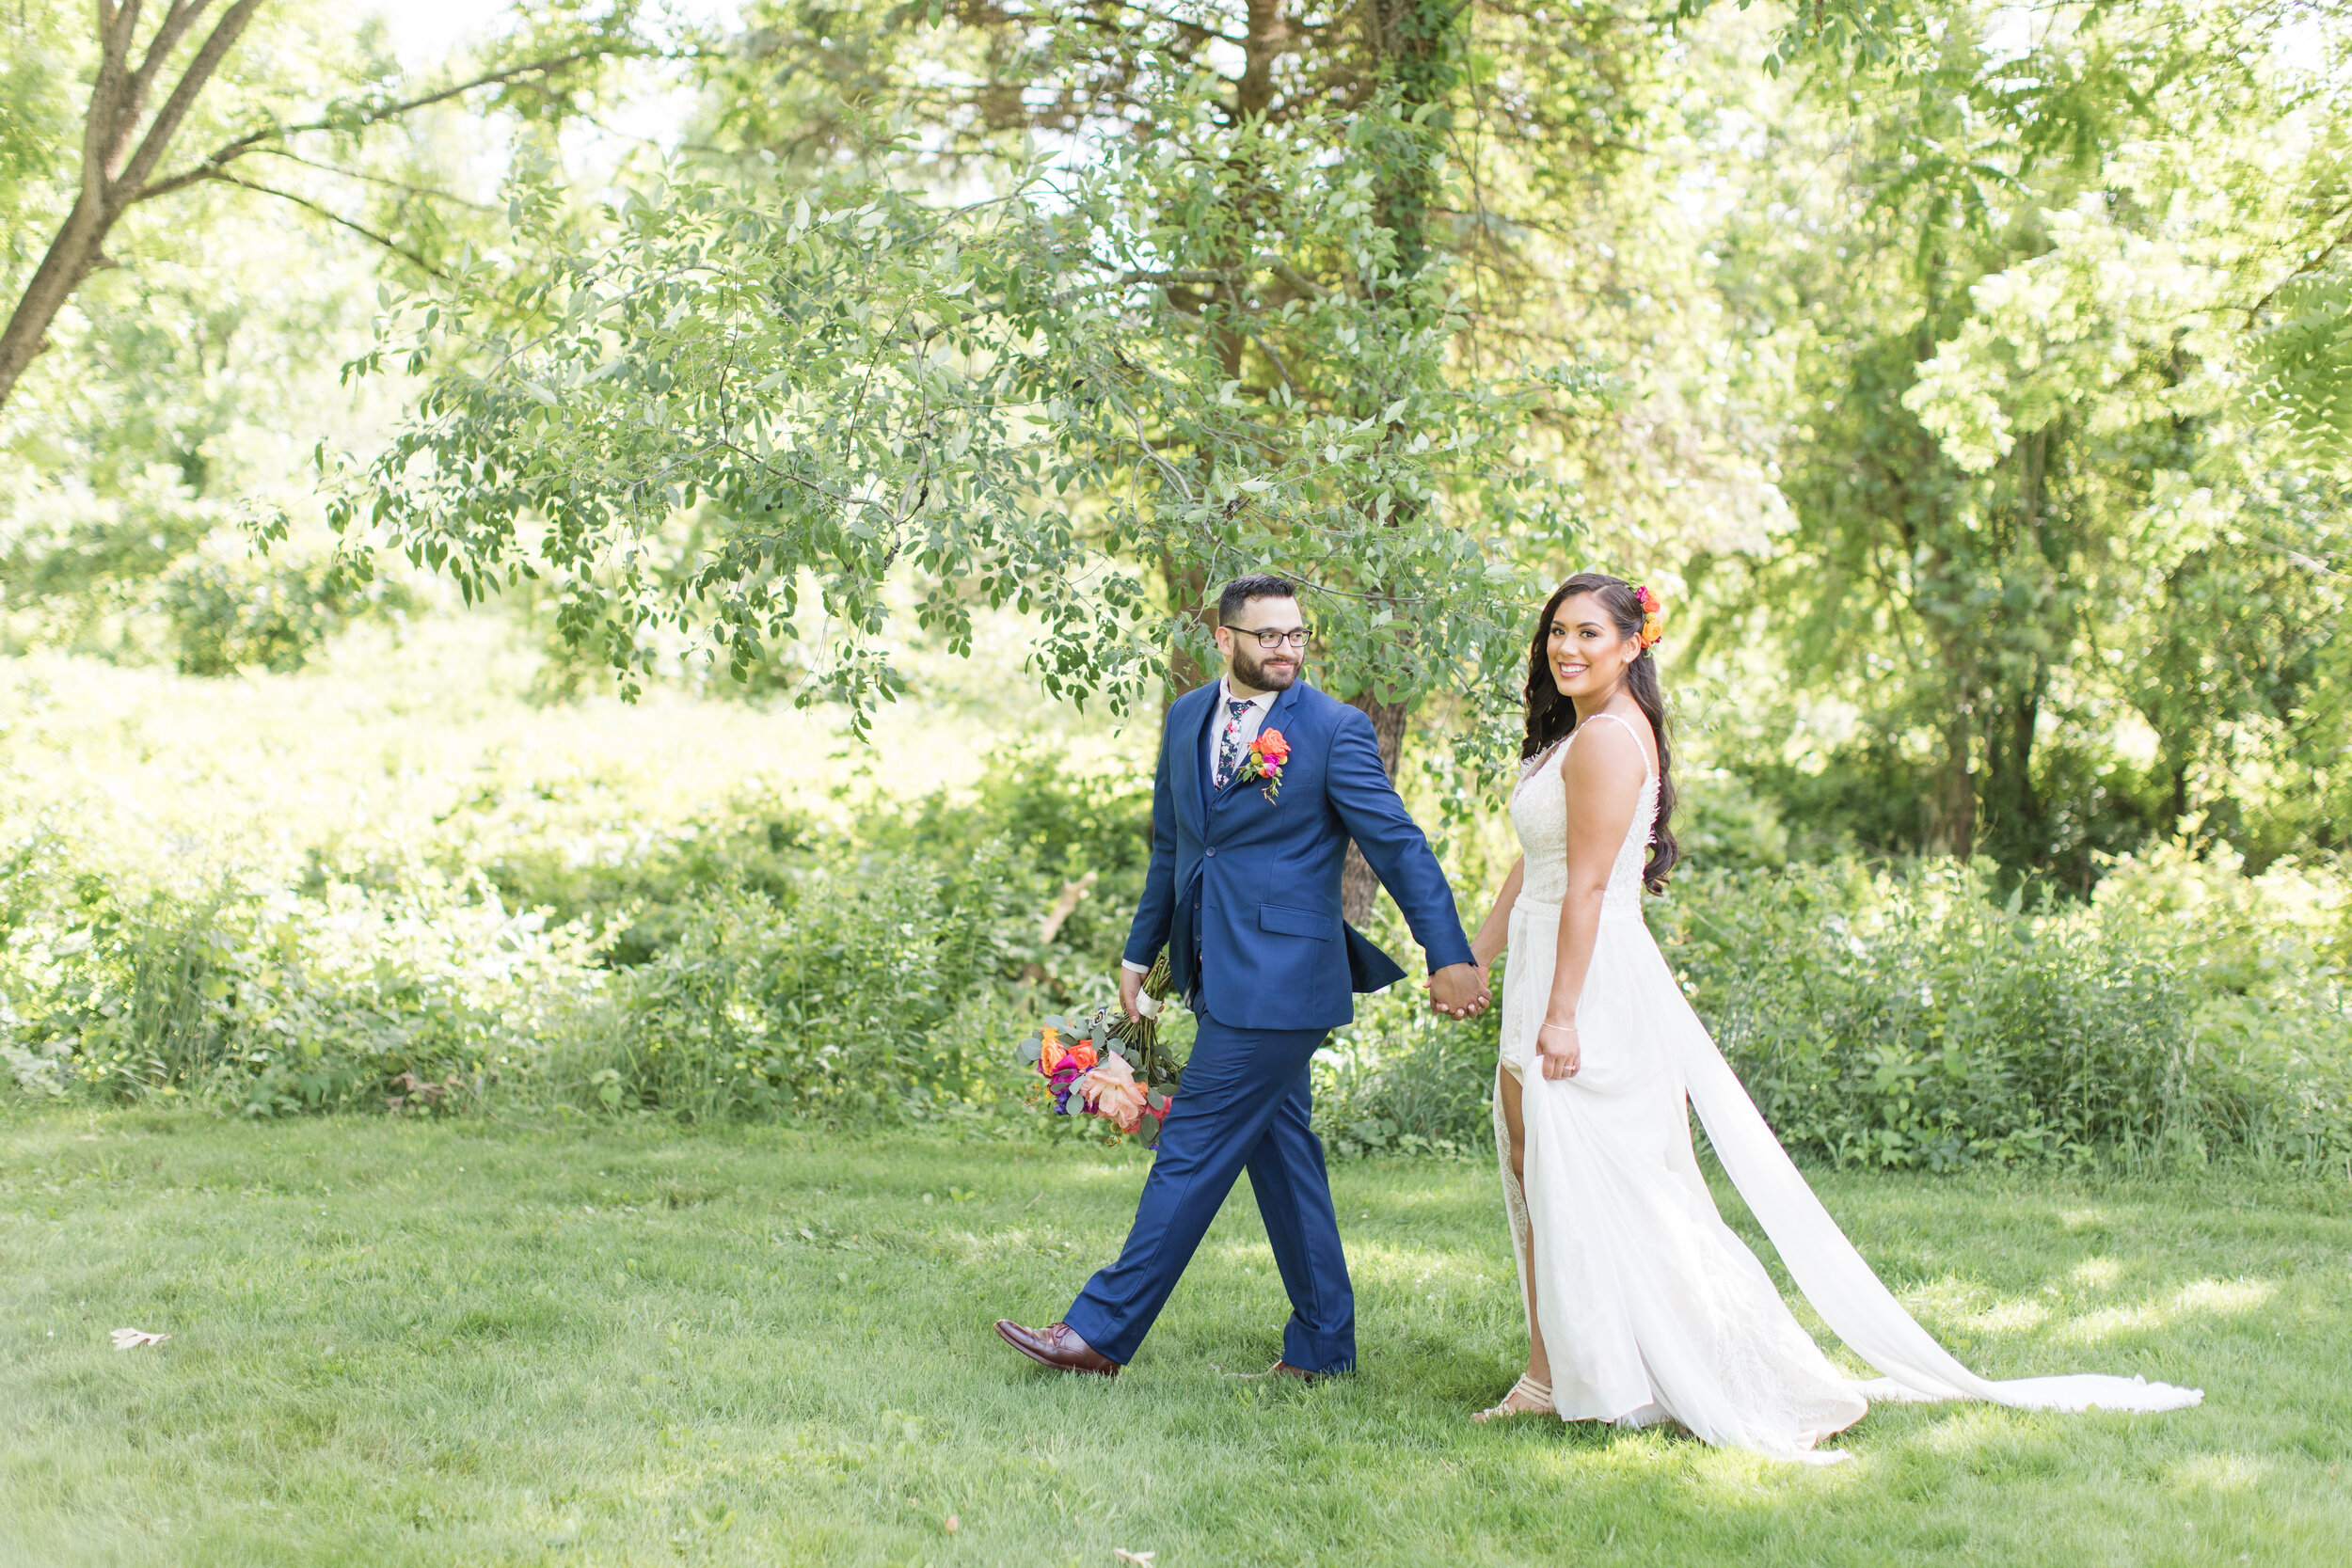 Kelly Pullman photography photographed this summery whimsical wedding featuring the June Fete Fairgrounds and a reception at Yard’s Brewery in Philadelphia.